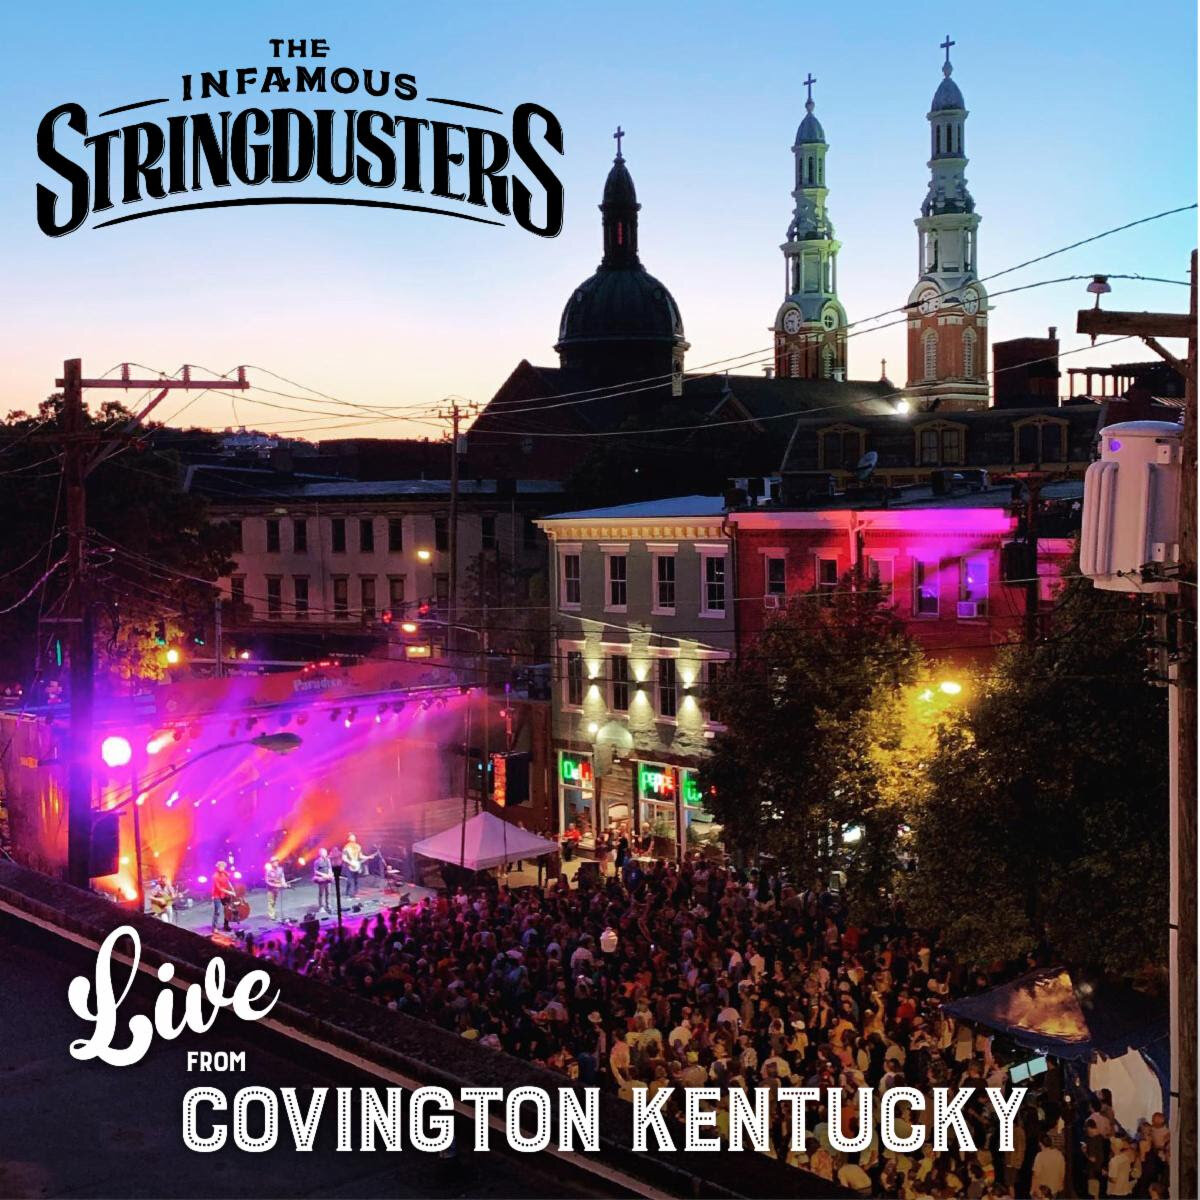 - @mothermother "O My Heart" (Greatest album to ever come out of Canada. Fight me on this)- @stringdusters "Live from Covington KY" (new, very good live album from one of the best jamgrass bands)- @frankturner "Show 2000" (one of the hottest crowds I've ever heard on a live album"